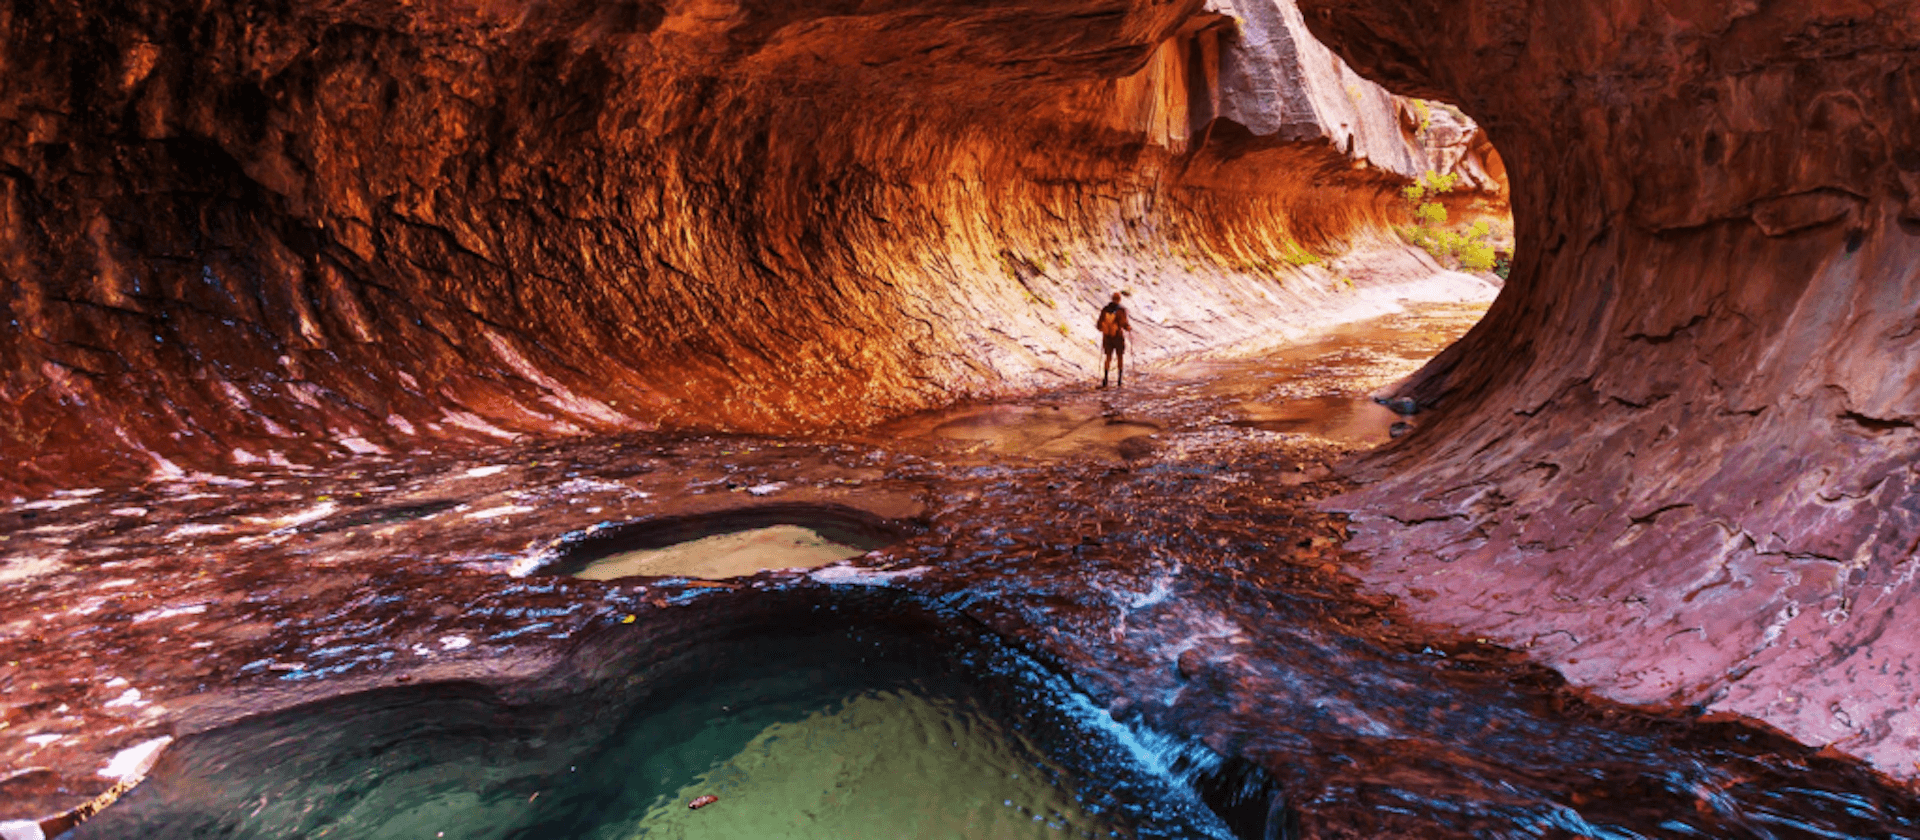 Zion,  top adventure travel destinations in the United States